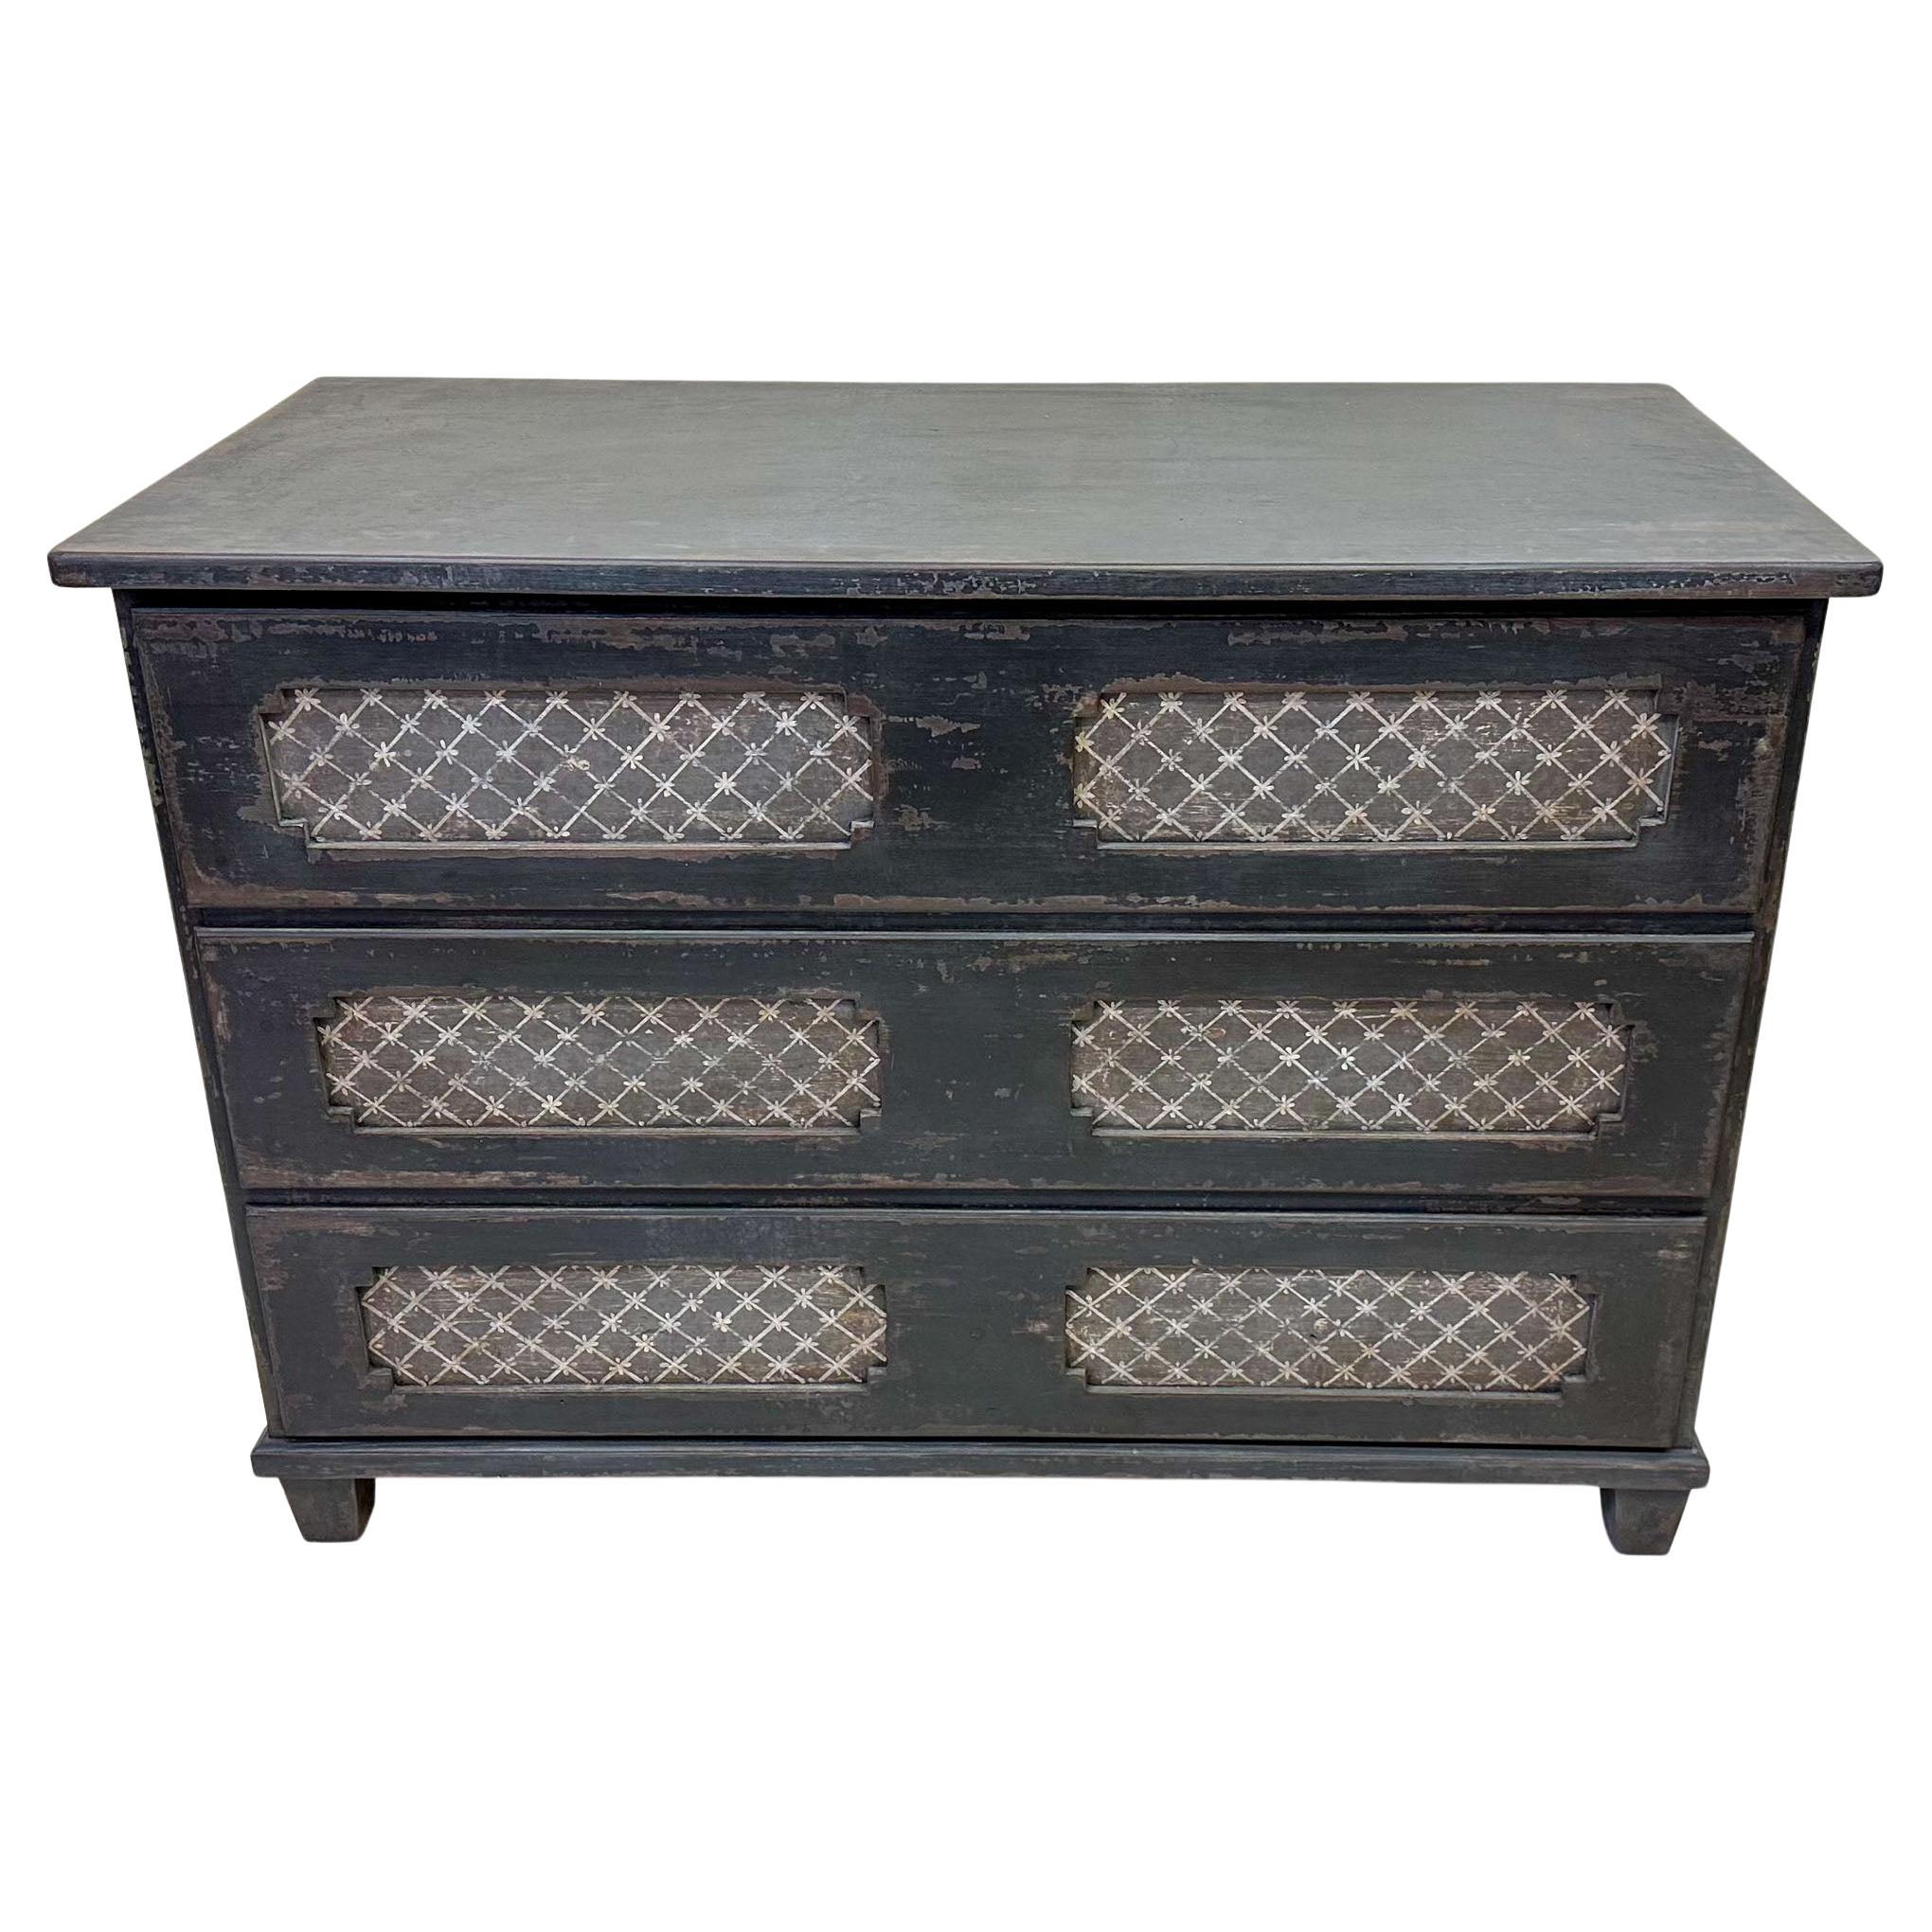 Baroque chest of drawers with three drawers and a straight body as well as octagonal panels. The dark grey setting with diamond-shaped decoration in the panels is new and has been decoratively patinated.